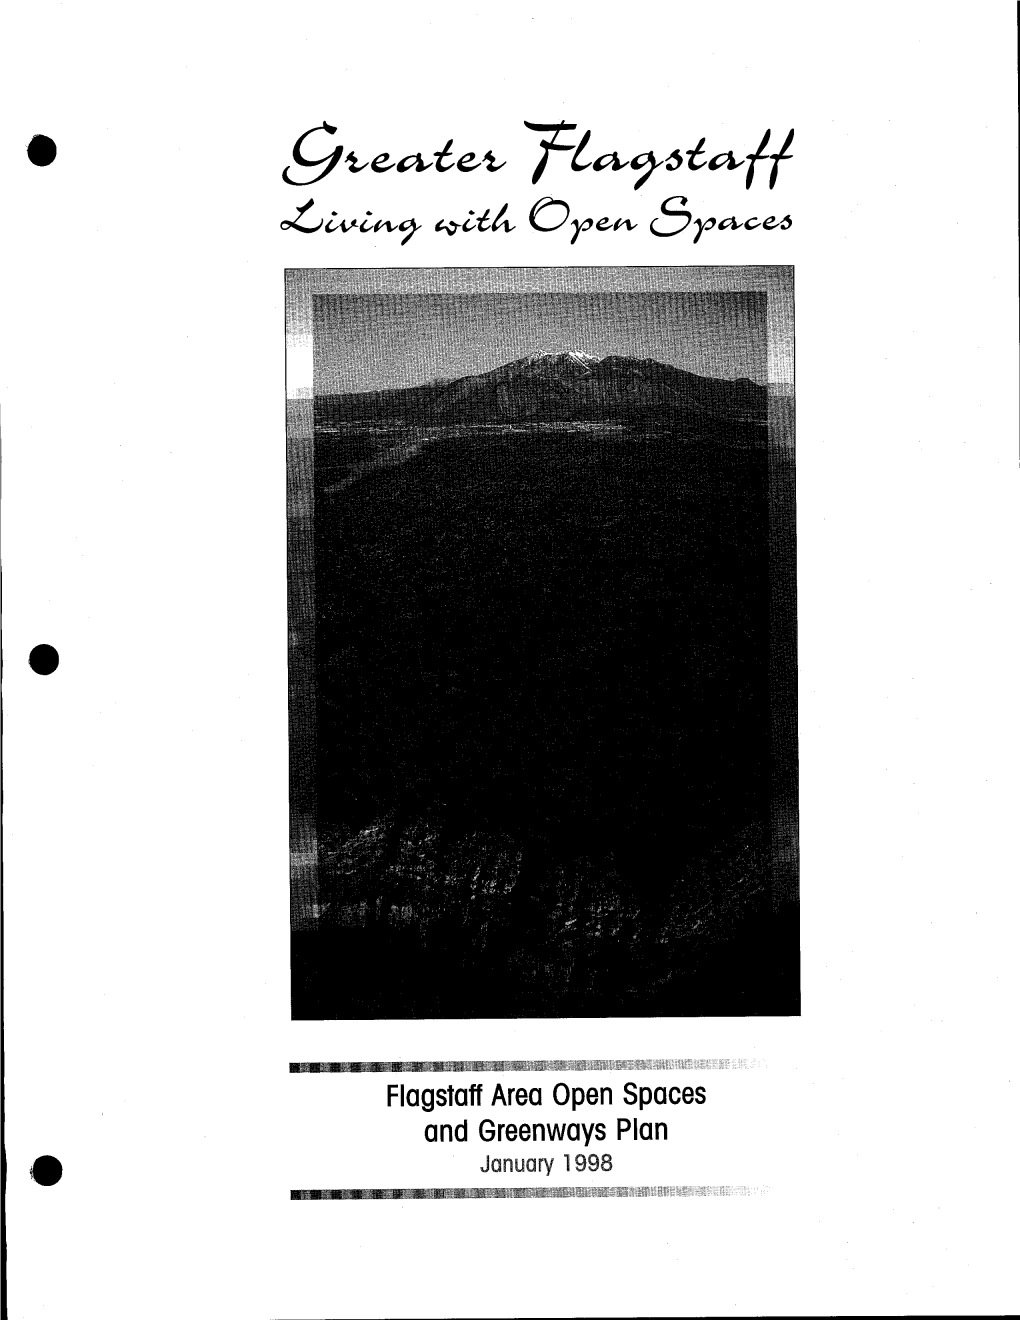 Flagstaff Area Open Spaces and Greenways Plan (PDF)